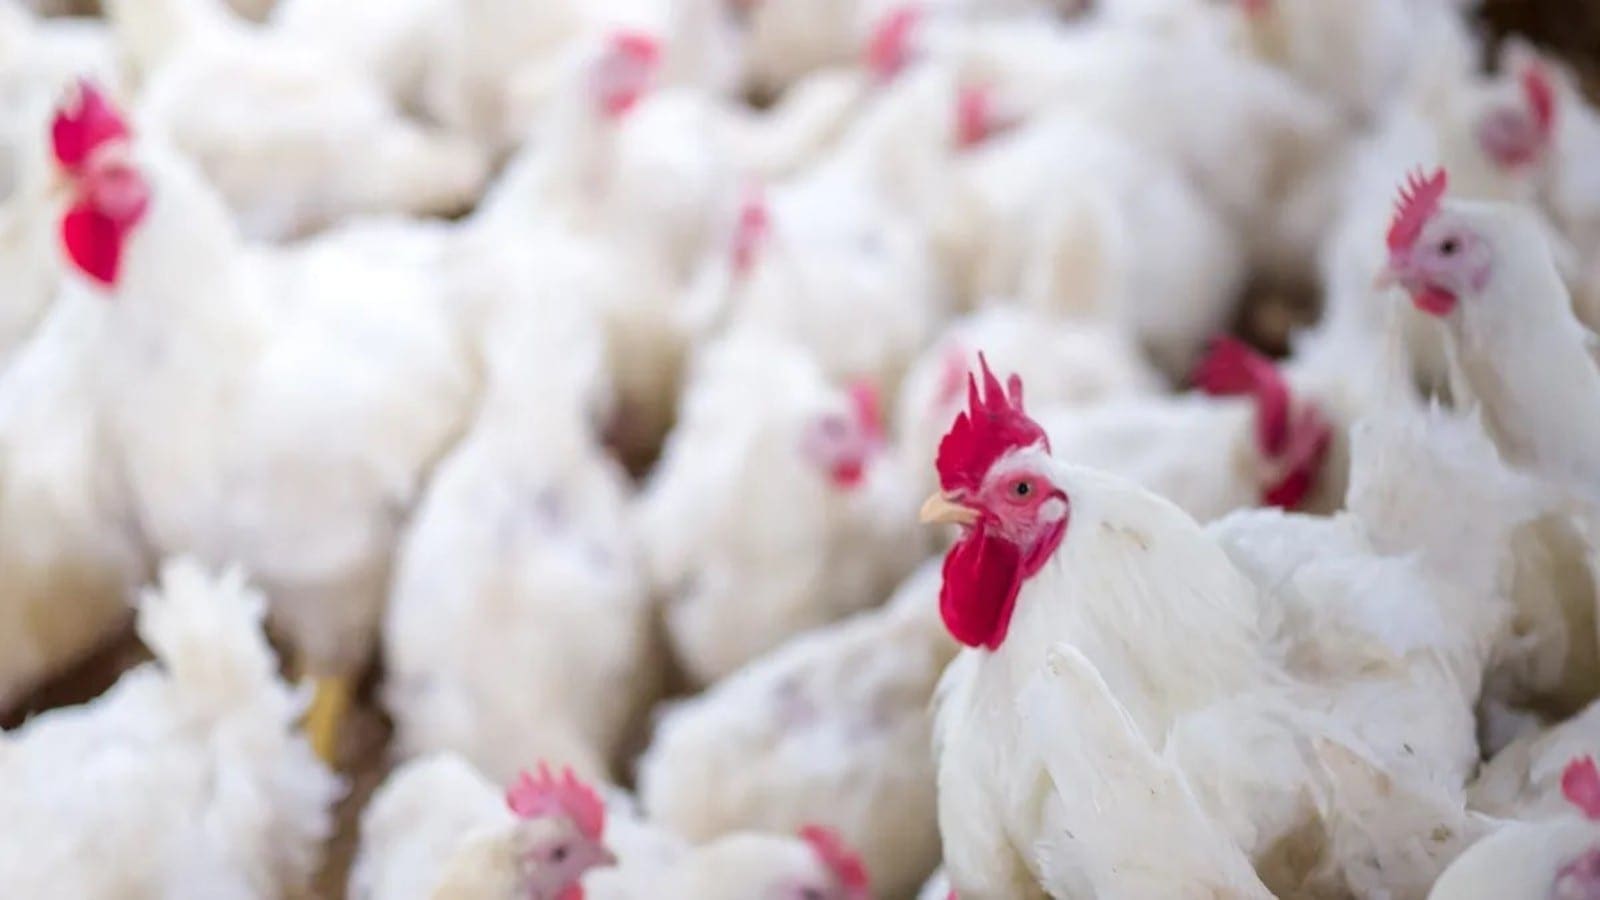 Avian flu spreads across Nigeria causing US$1.3m worth of poultry loss in Kano State